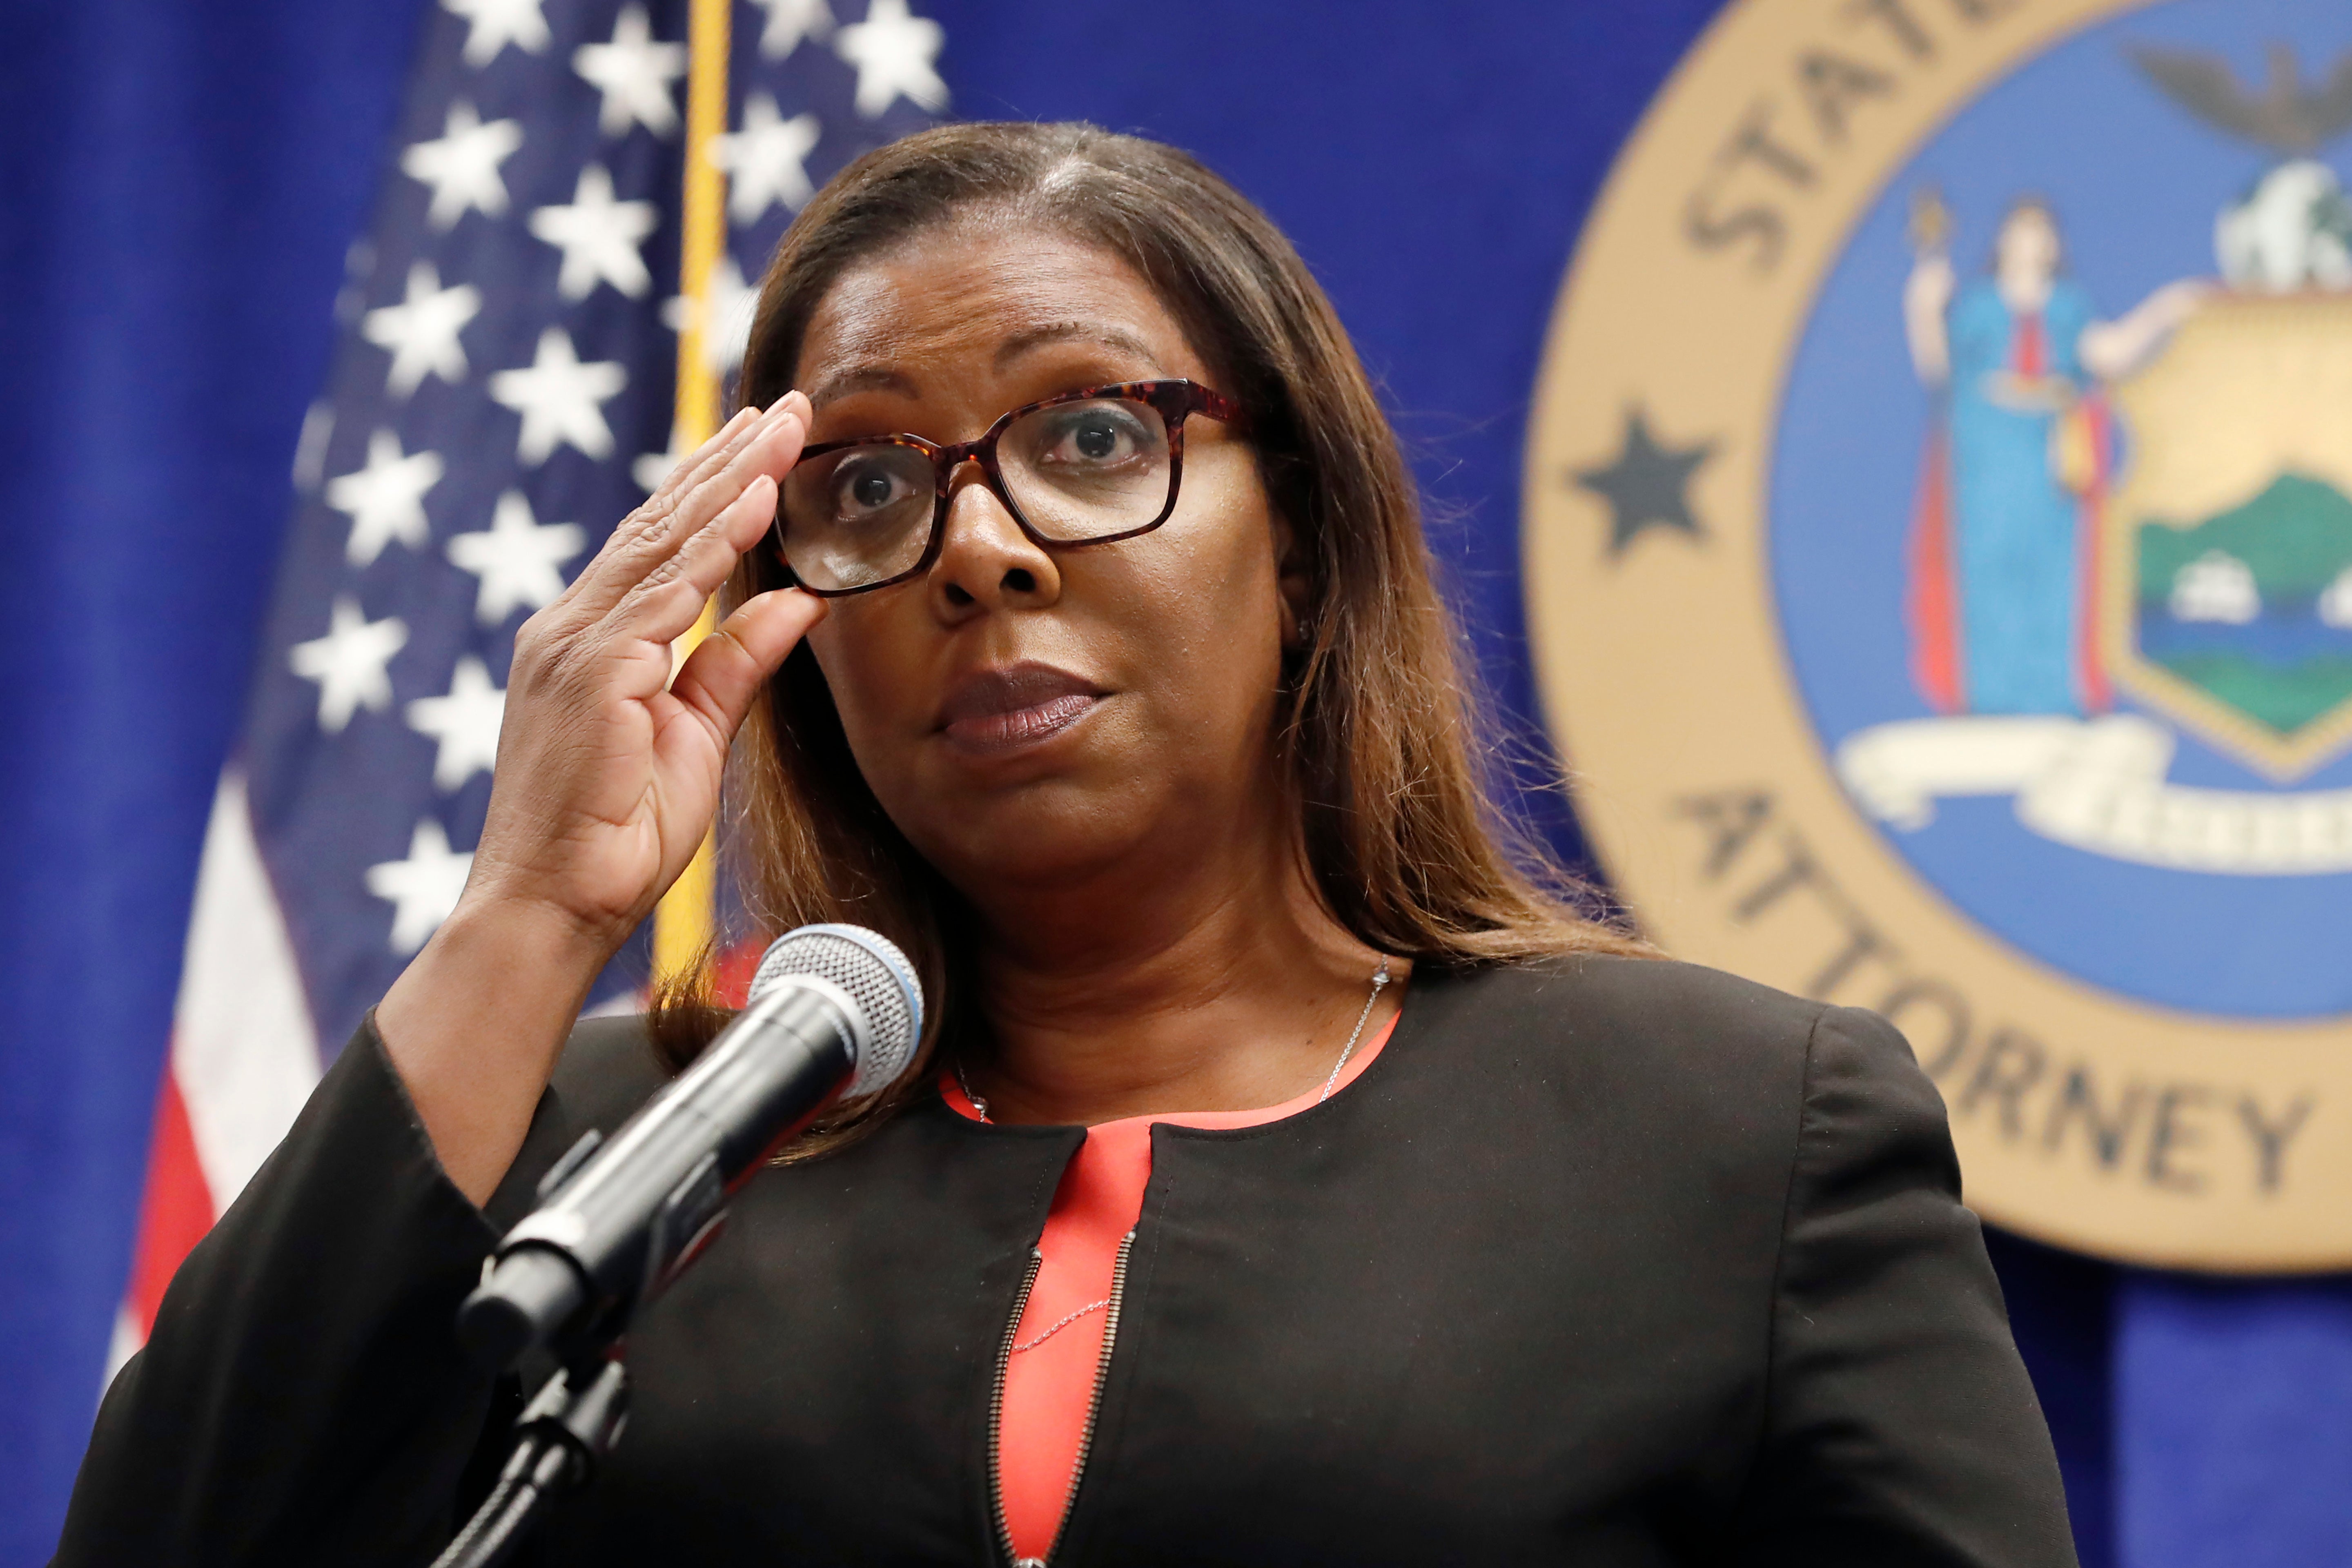 New York AG Letitia James’ probe found that the then-governor had sexually harassed 11 women